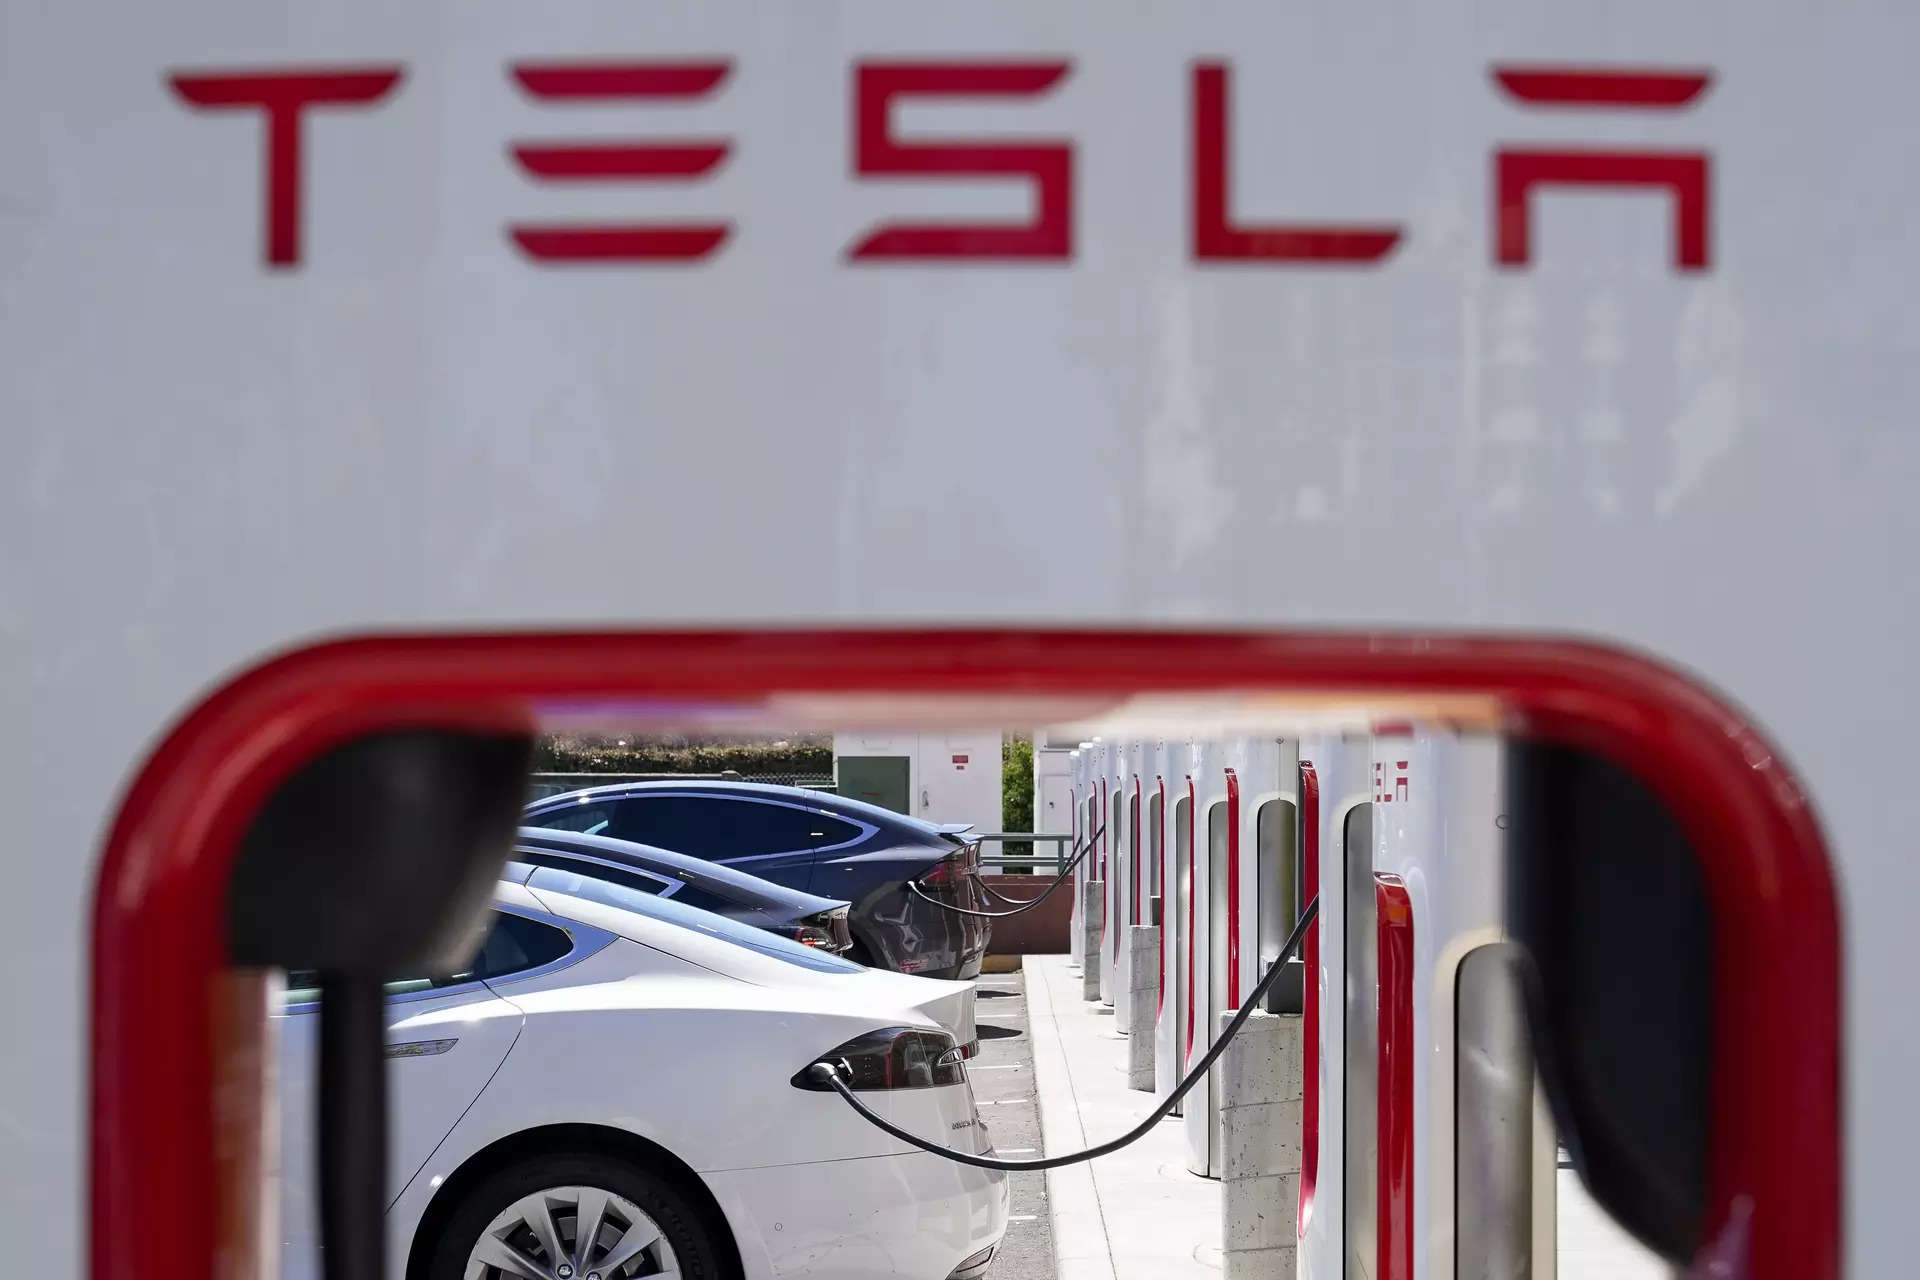 <p>Tesla's claims about Autopilot and FSD have also drawn scrutiny in regulatory investigations and lawsuits.</p>